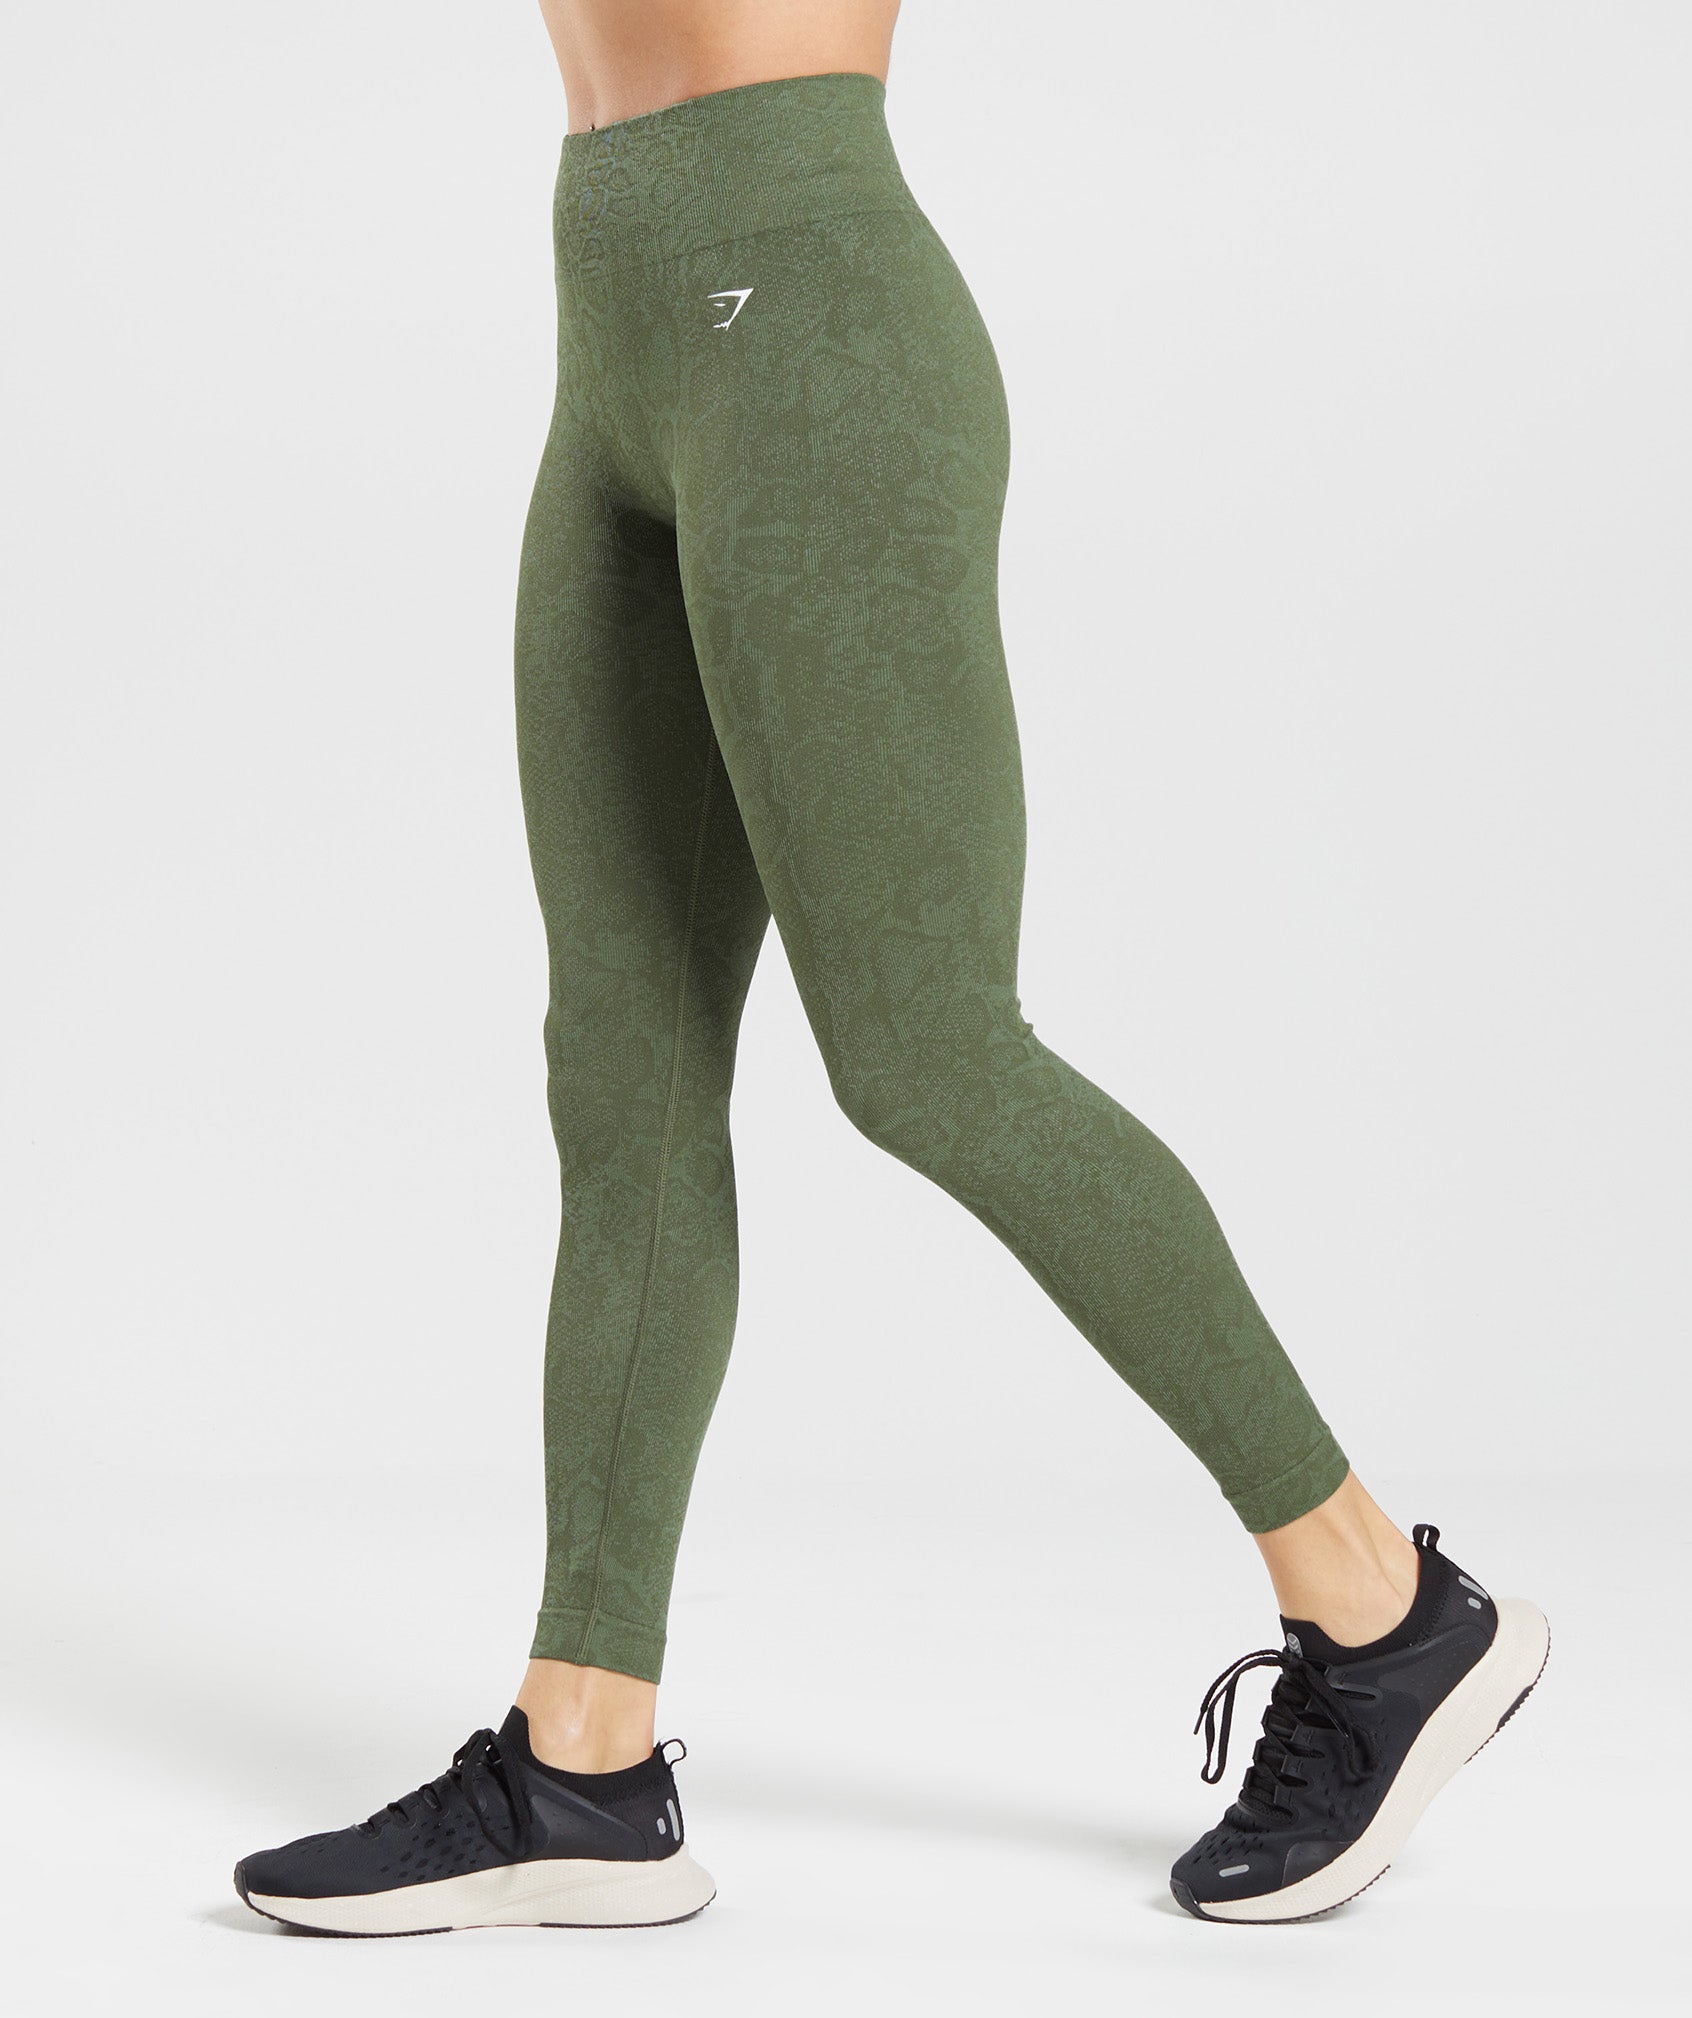 Adapt Animal Seamless Leggings in Willow Green/Core Olive - view 3